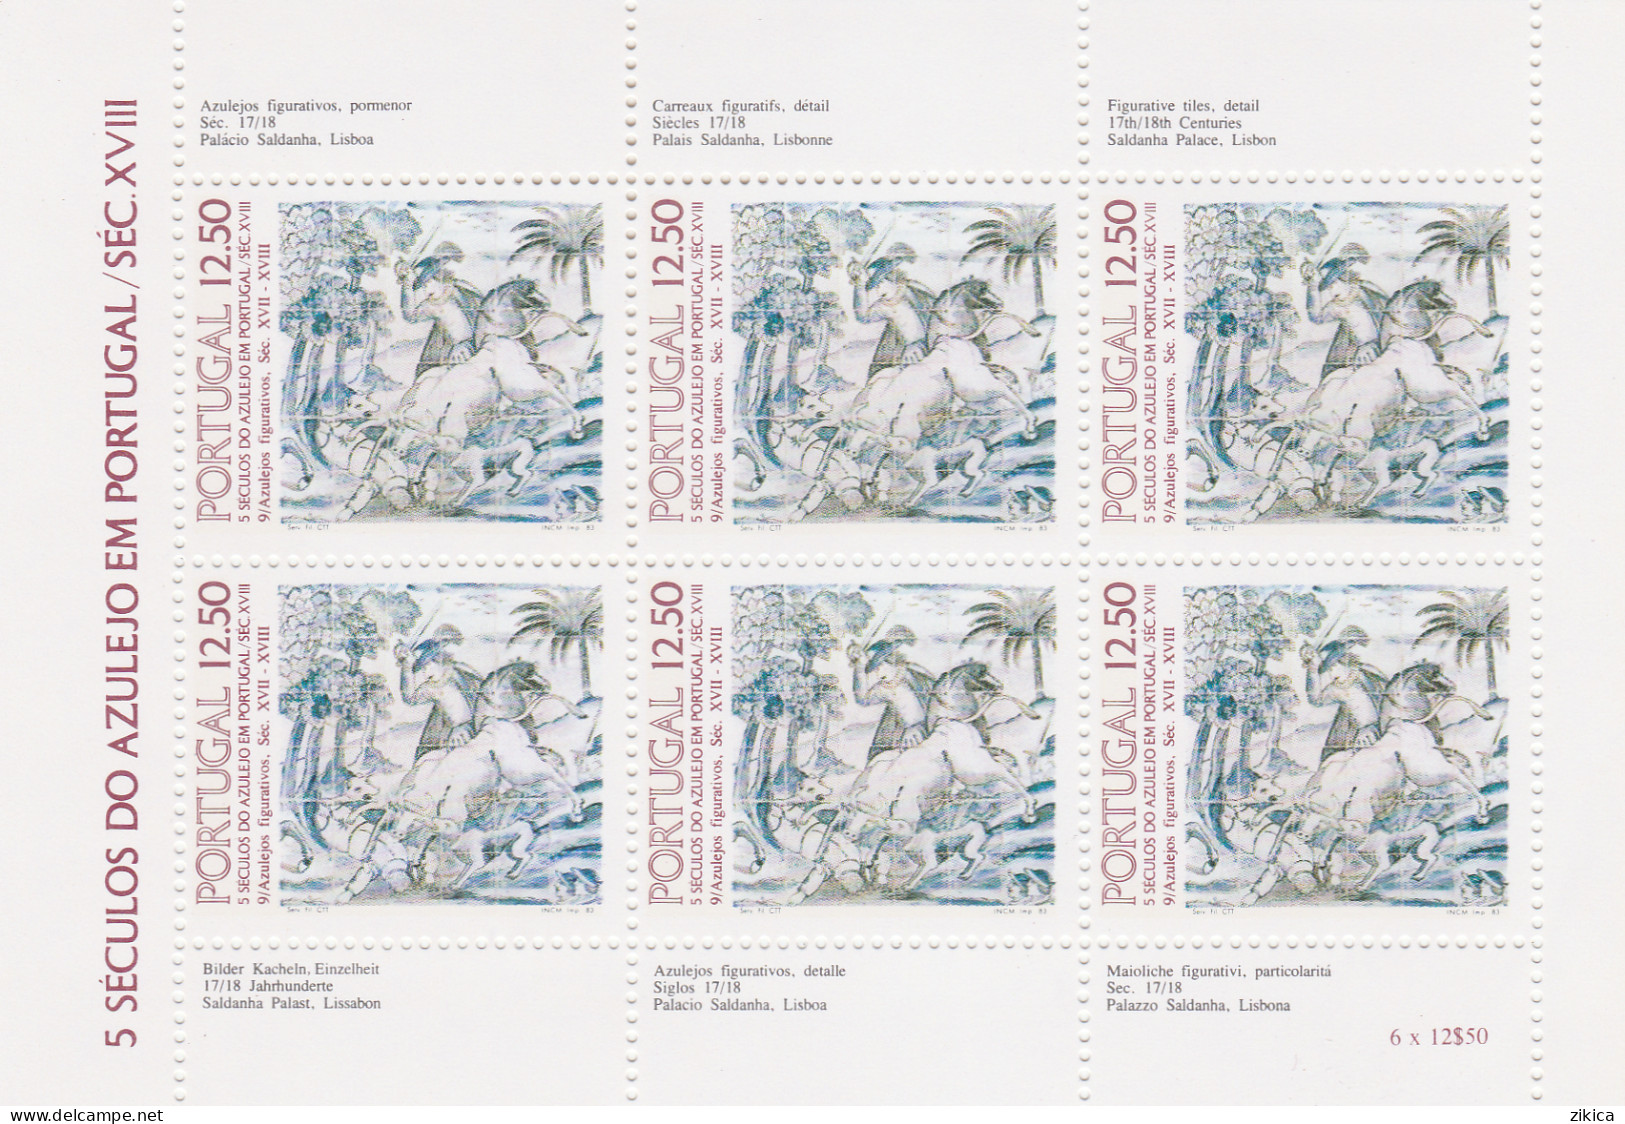 Portugal - 1983 The 500th Anniversary Of Azulejos In Portugal,M/S MNH** - Neufs